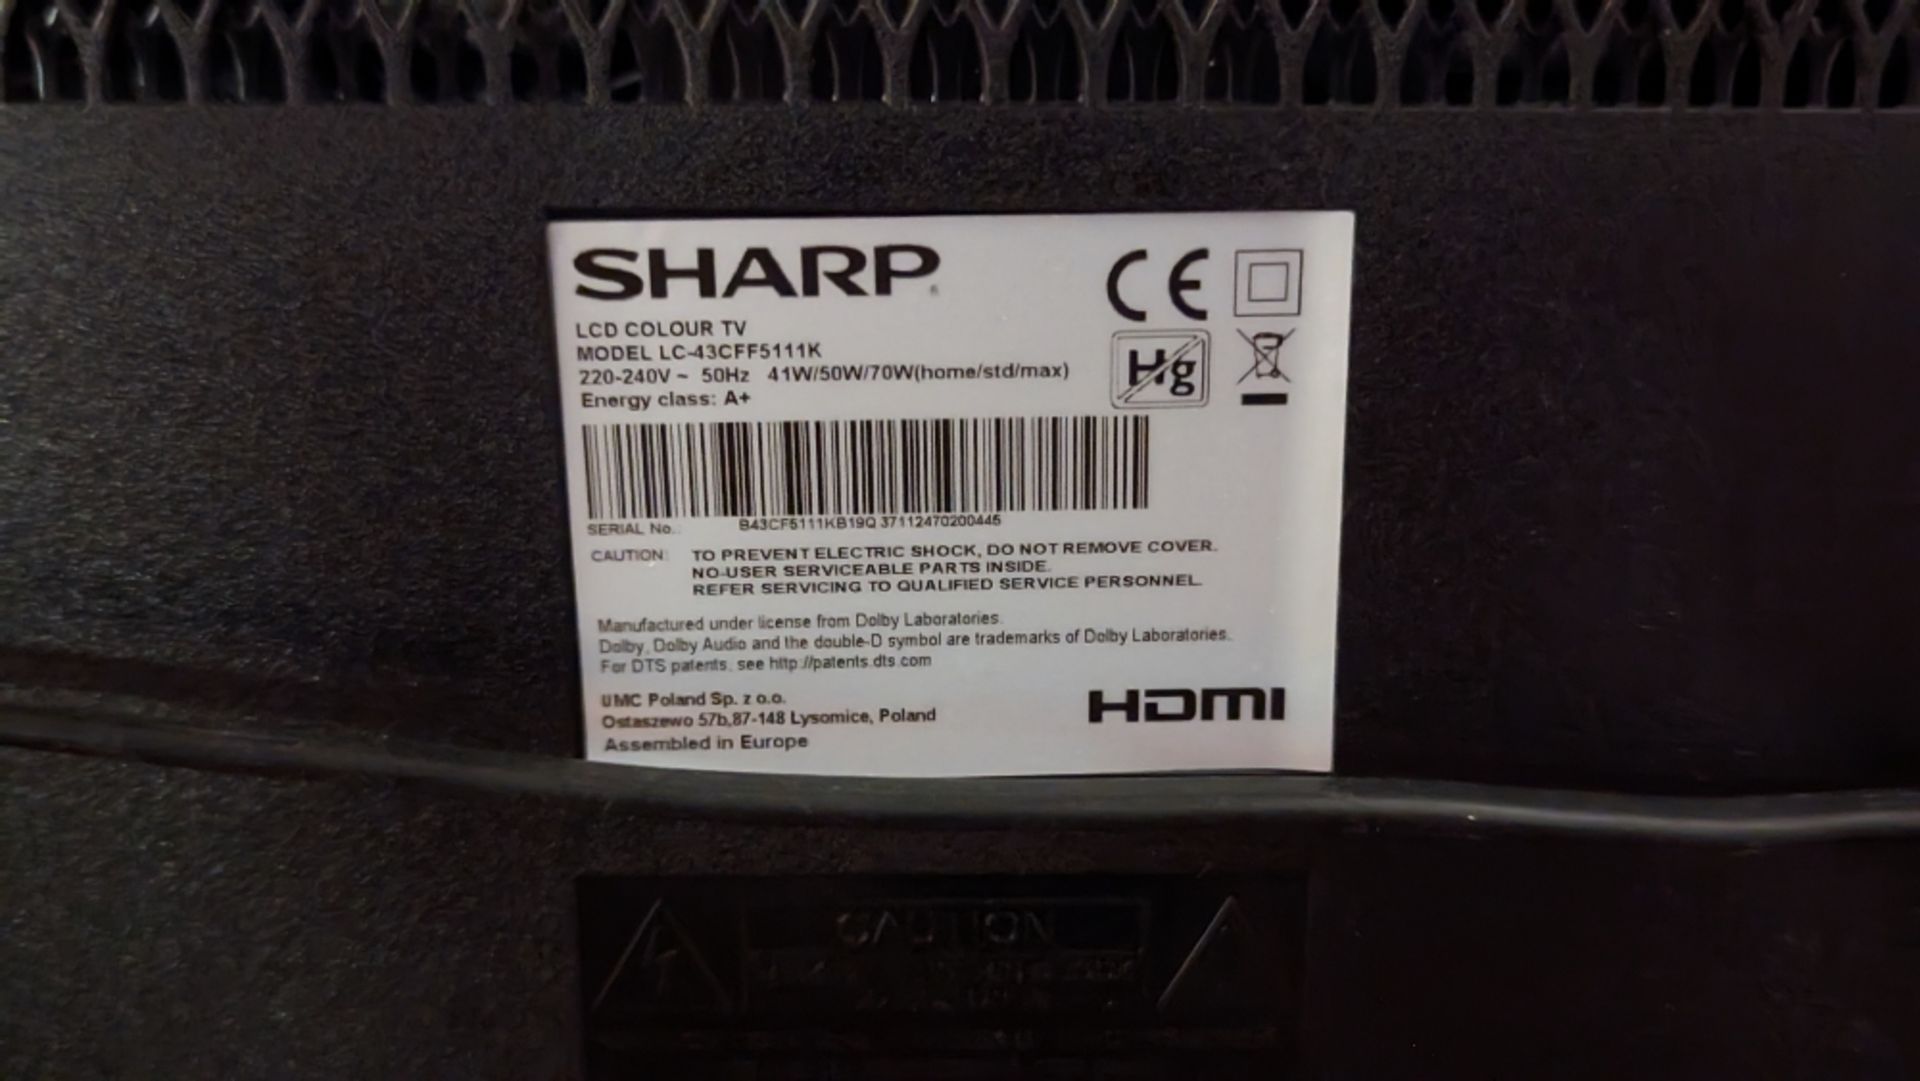 Sharp LC-43CFF5111K television with power cord - Image 2 of 2